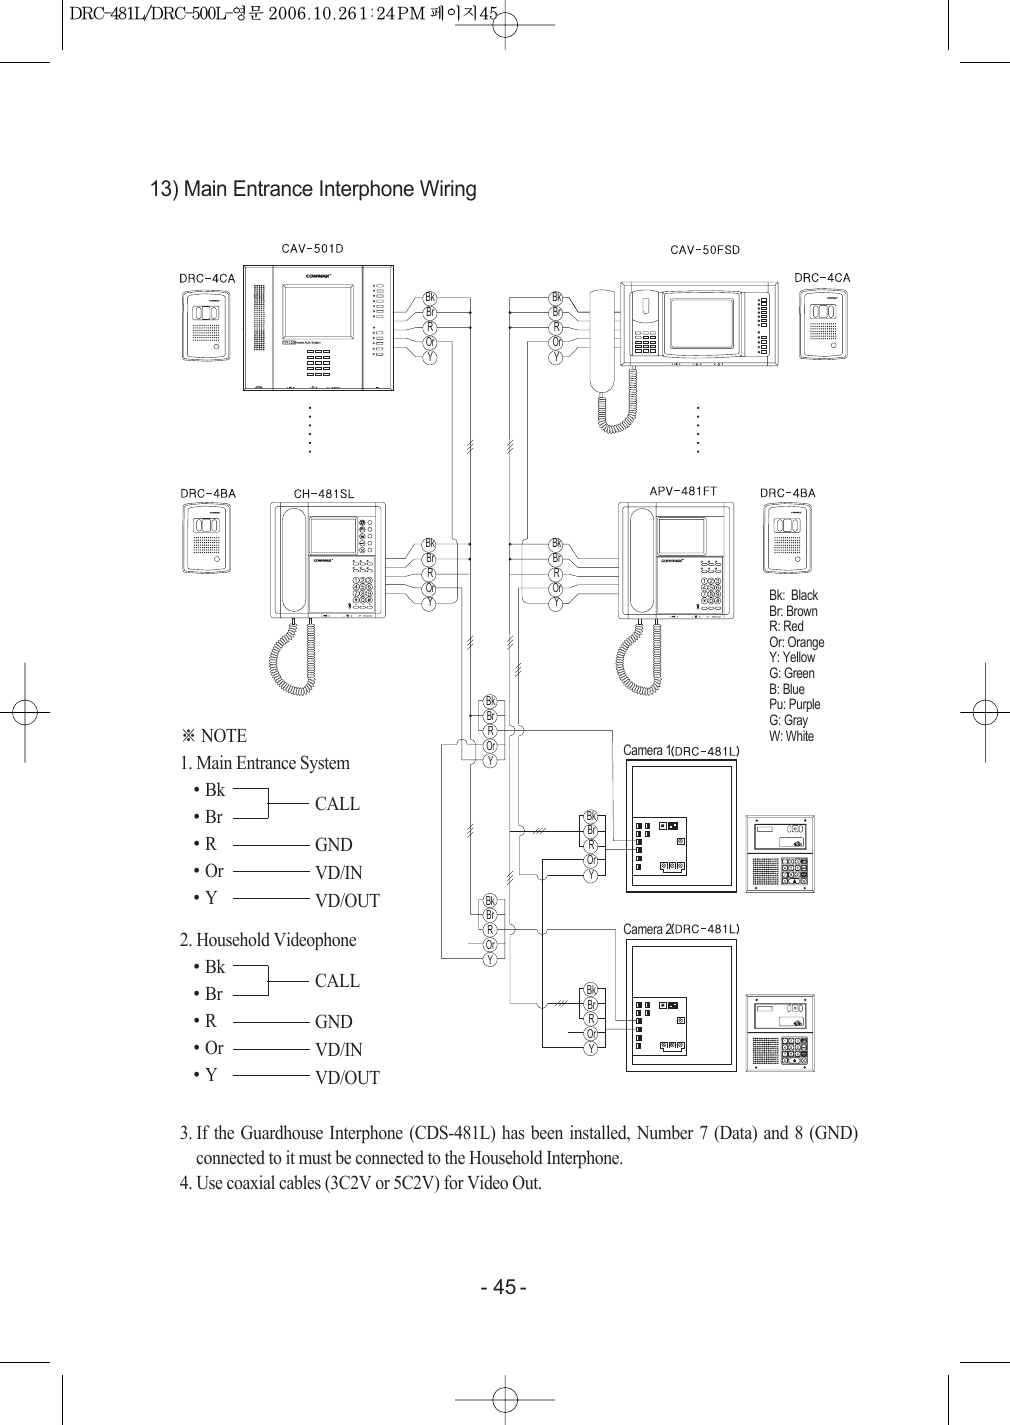 - 45 -13) Main Entrance Interphone Wiring※NOTE1. Main Entrance System󳀏Bk󳀏Br󳀏R󳀏Or󳀏YCALLGNDVD/INVD/OUT2. Household Videophone󳀏Bk󳀏Br󳀏R󳀏Or󳀏YCALLGNDVD/INVD/OUT3. If the Guardhouse Interphone (CDS-481L) has been installed, Number 7 (Data) and 8 (GND)connected to it must be connected to the Household Interphone.4. Use coaxial cables (3C2V or 5C2V) for Video Out.BkBrROrYBkBrROrYBkBrROrYBkBrROrYBkBrROrYBkBrROrYBkBrROrYBkBrROrYBk:  BlackBr: BrownR: RedOr: OrangeY: YellowG: GreenB: BluePu: PurpleG: GrayW: WhiteCamera 1Camera 2DRC-481L/DRC-500L-영 문   2006.10.26 1:24 PM  페이지45